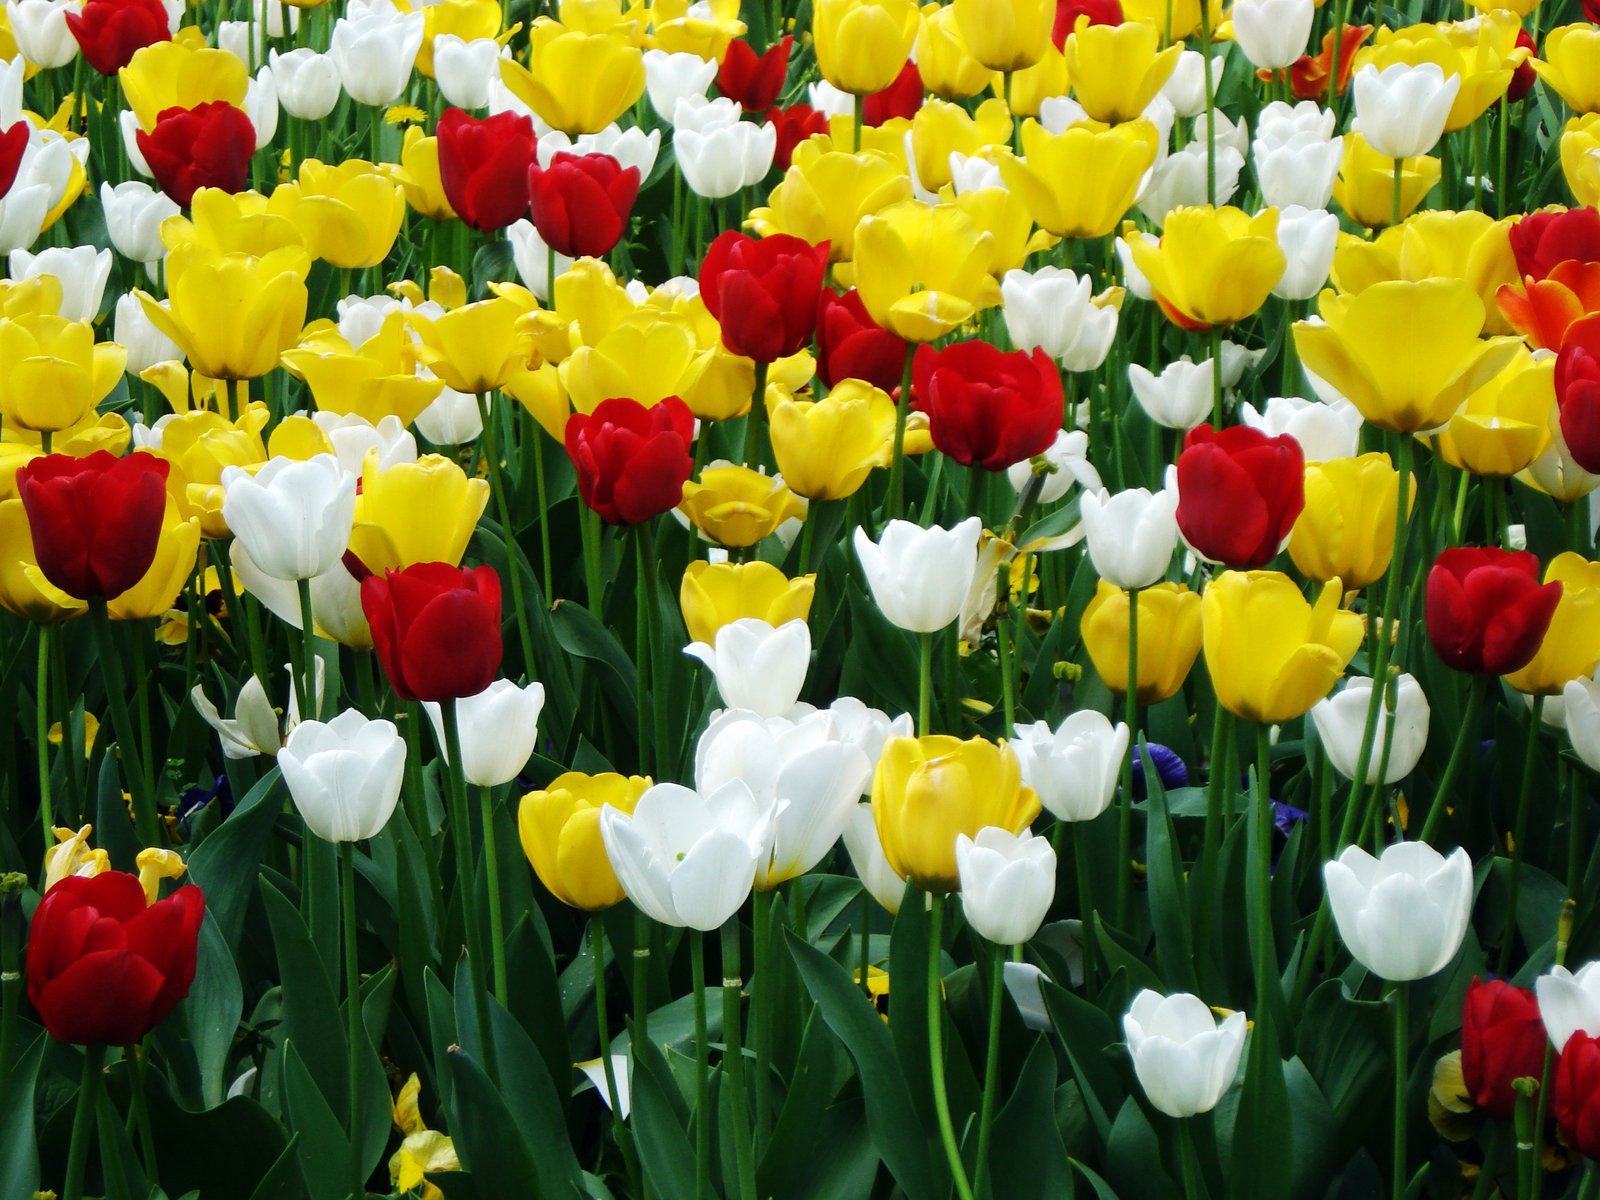 many different types and colors of tulips